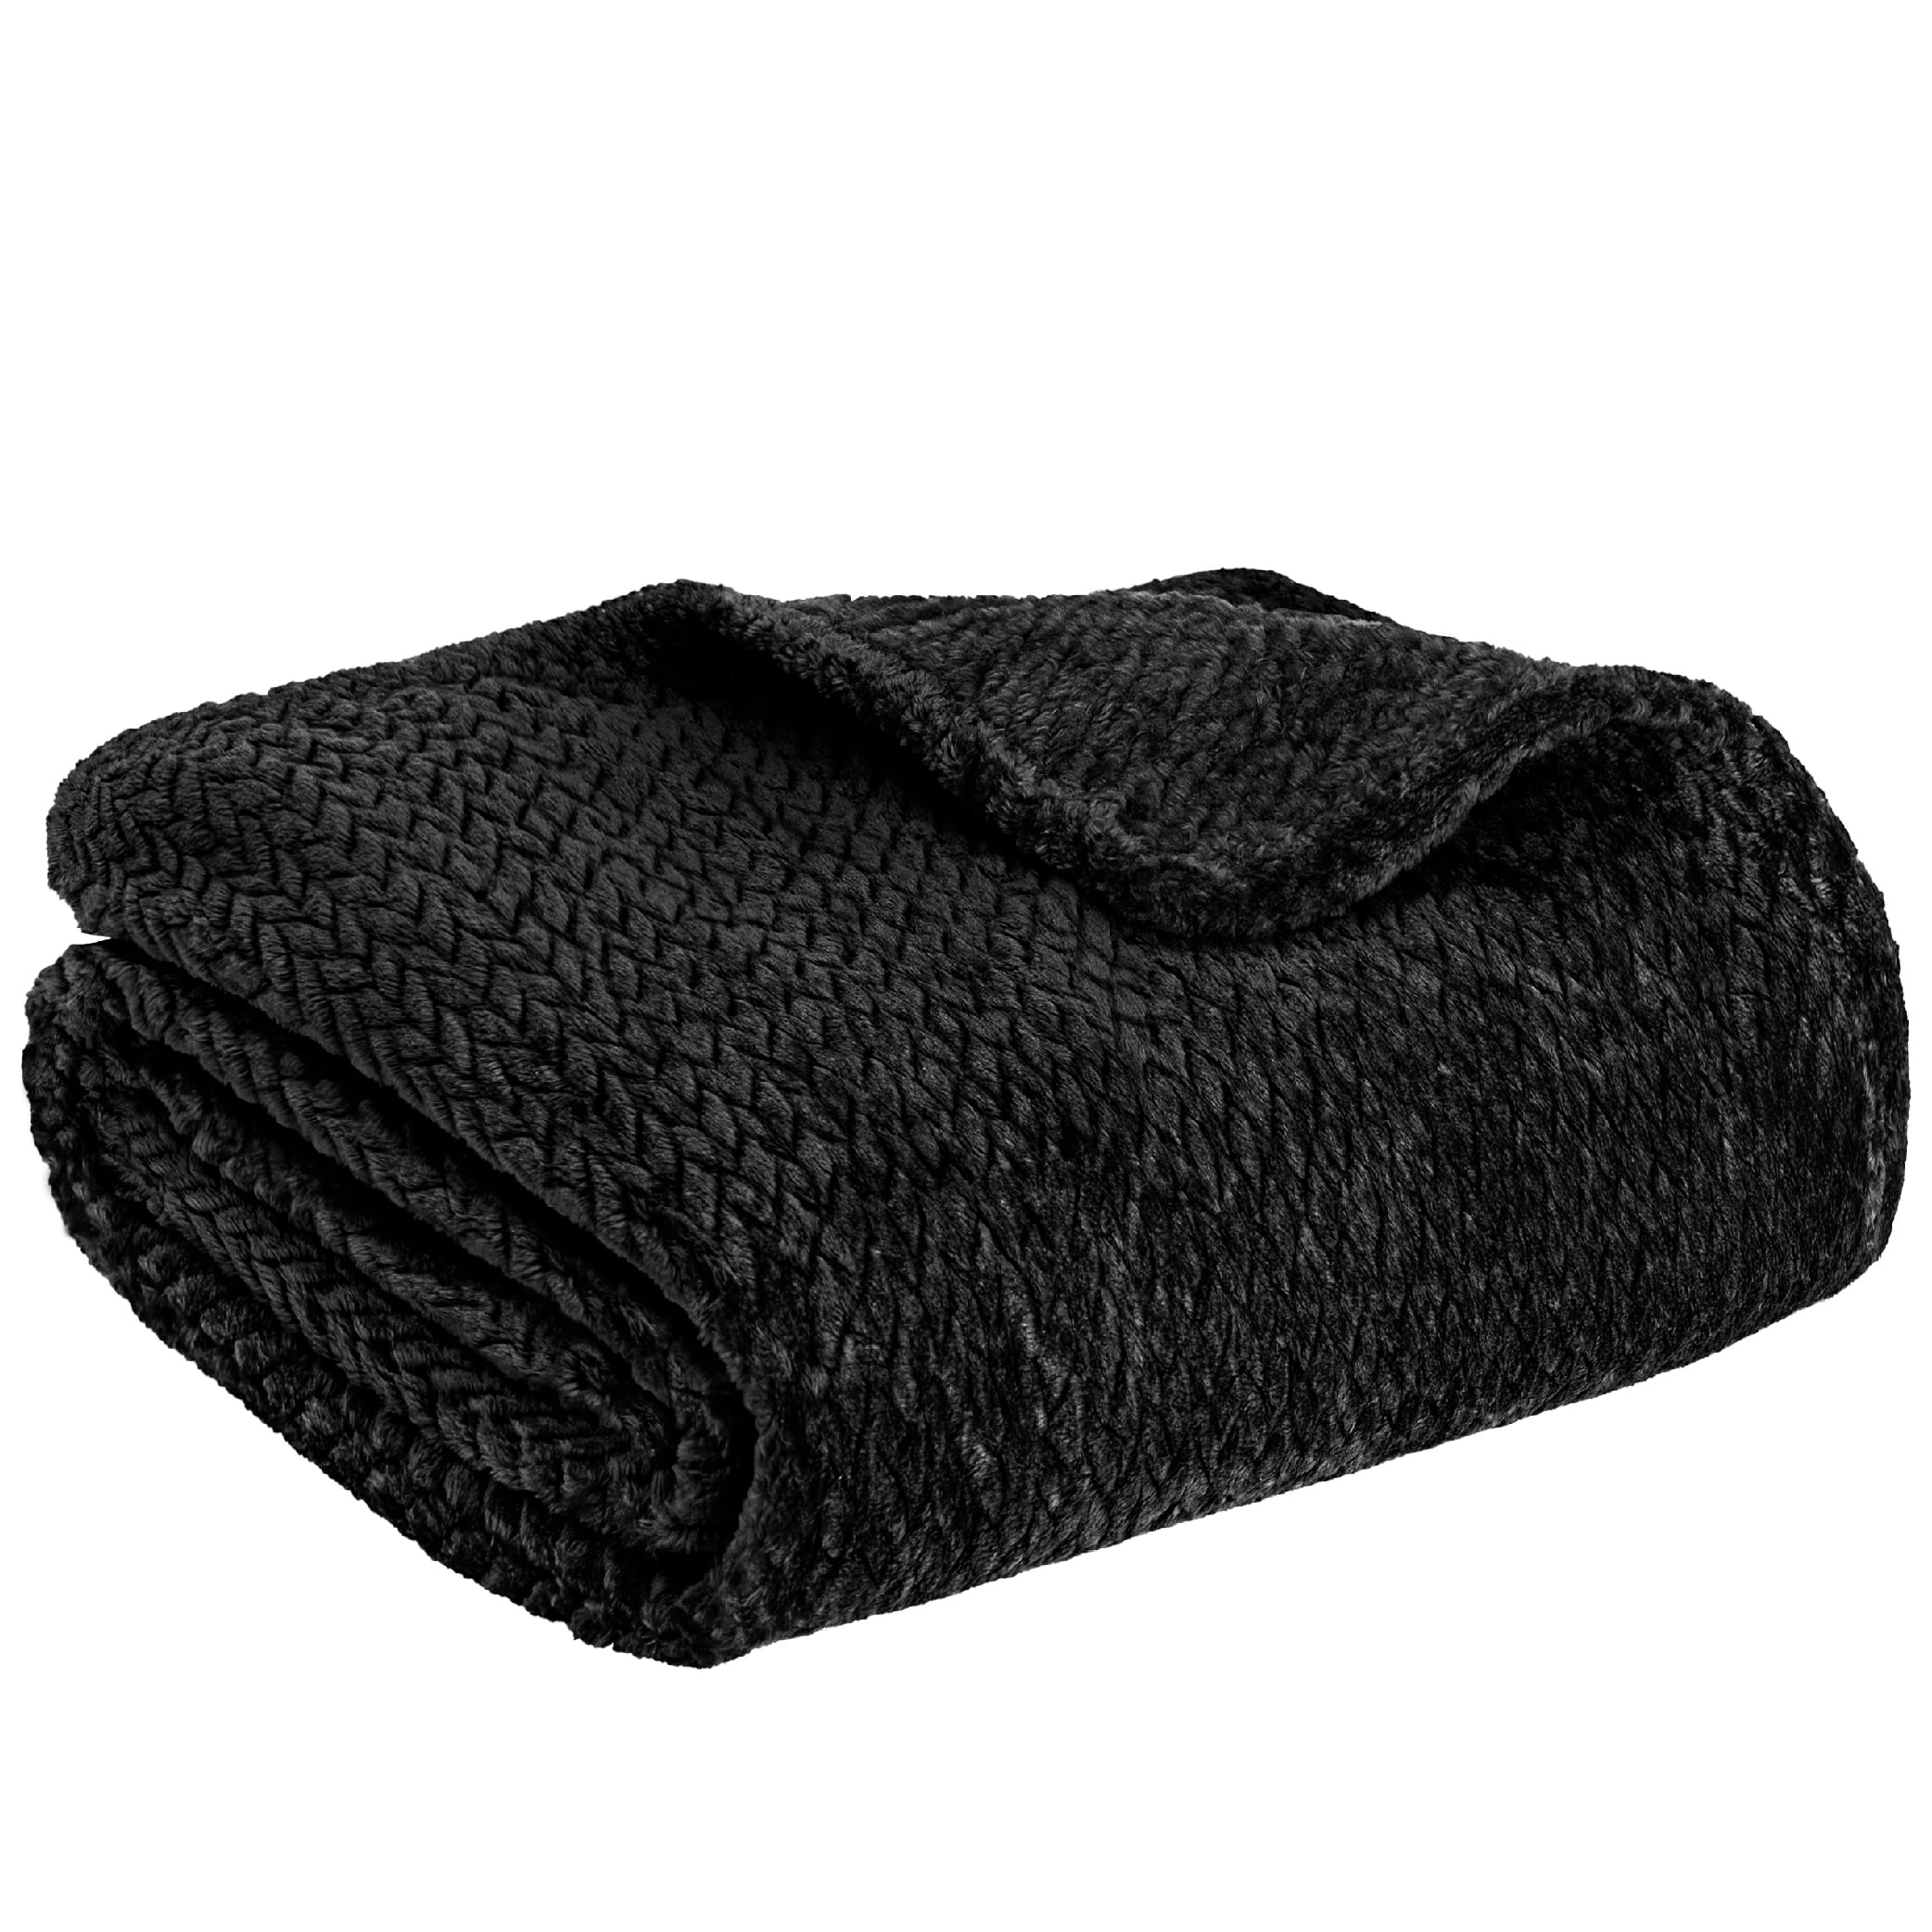 Huglanket Quilting Gifts Throws for Women, Flannel Blanket Black